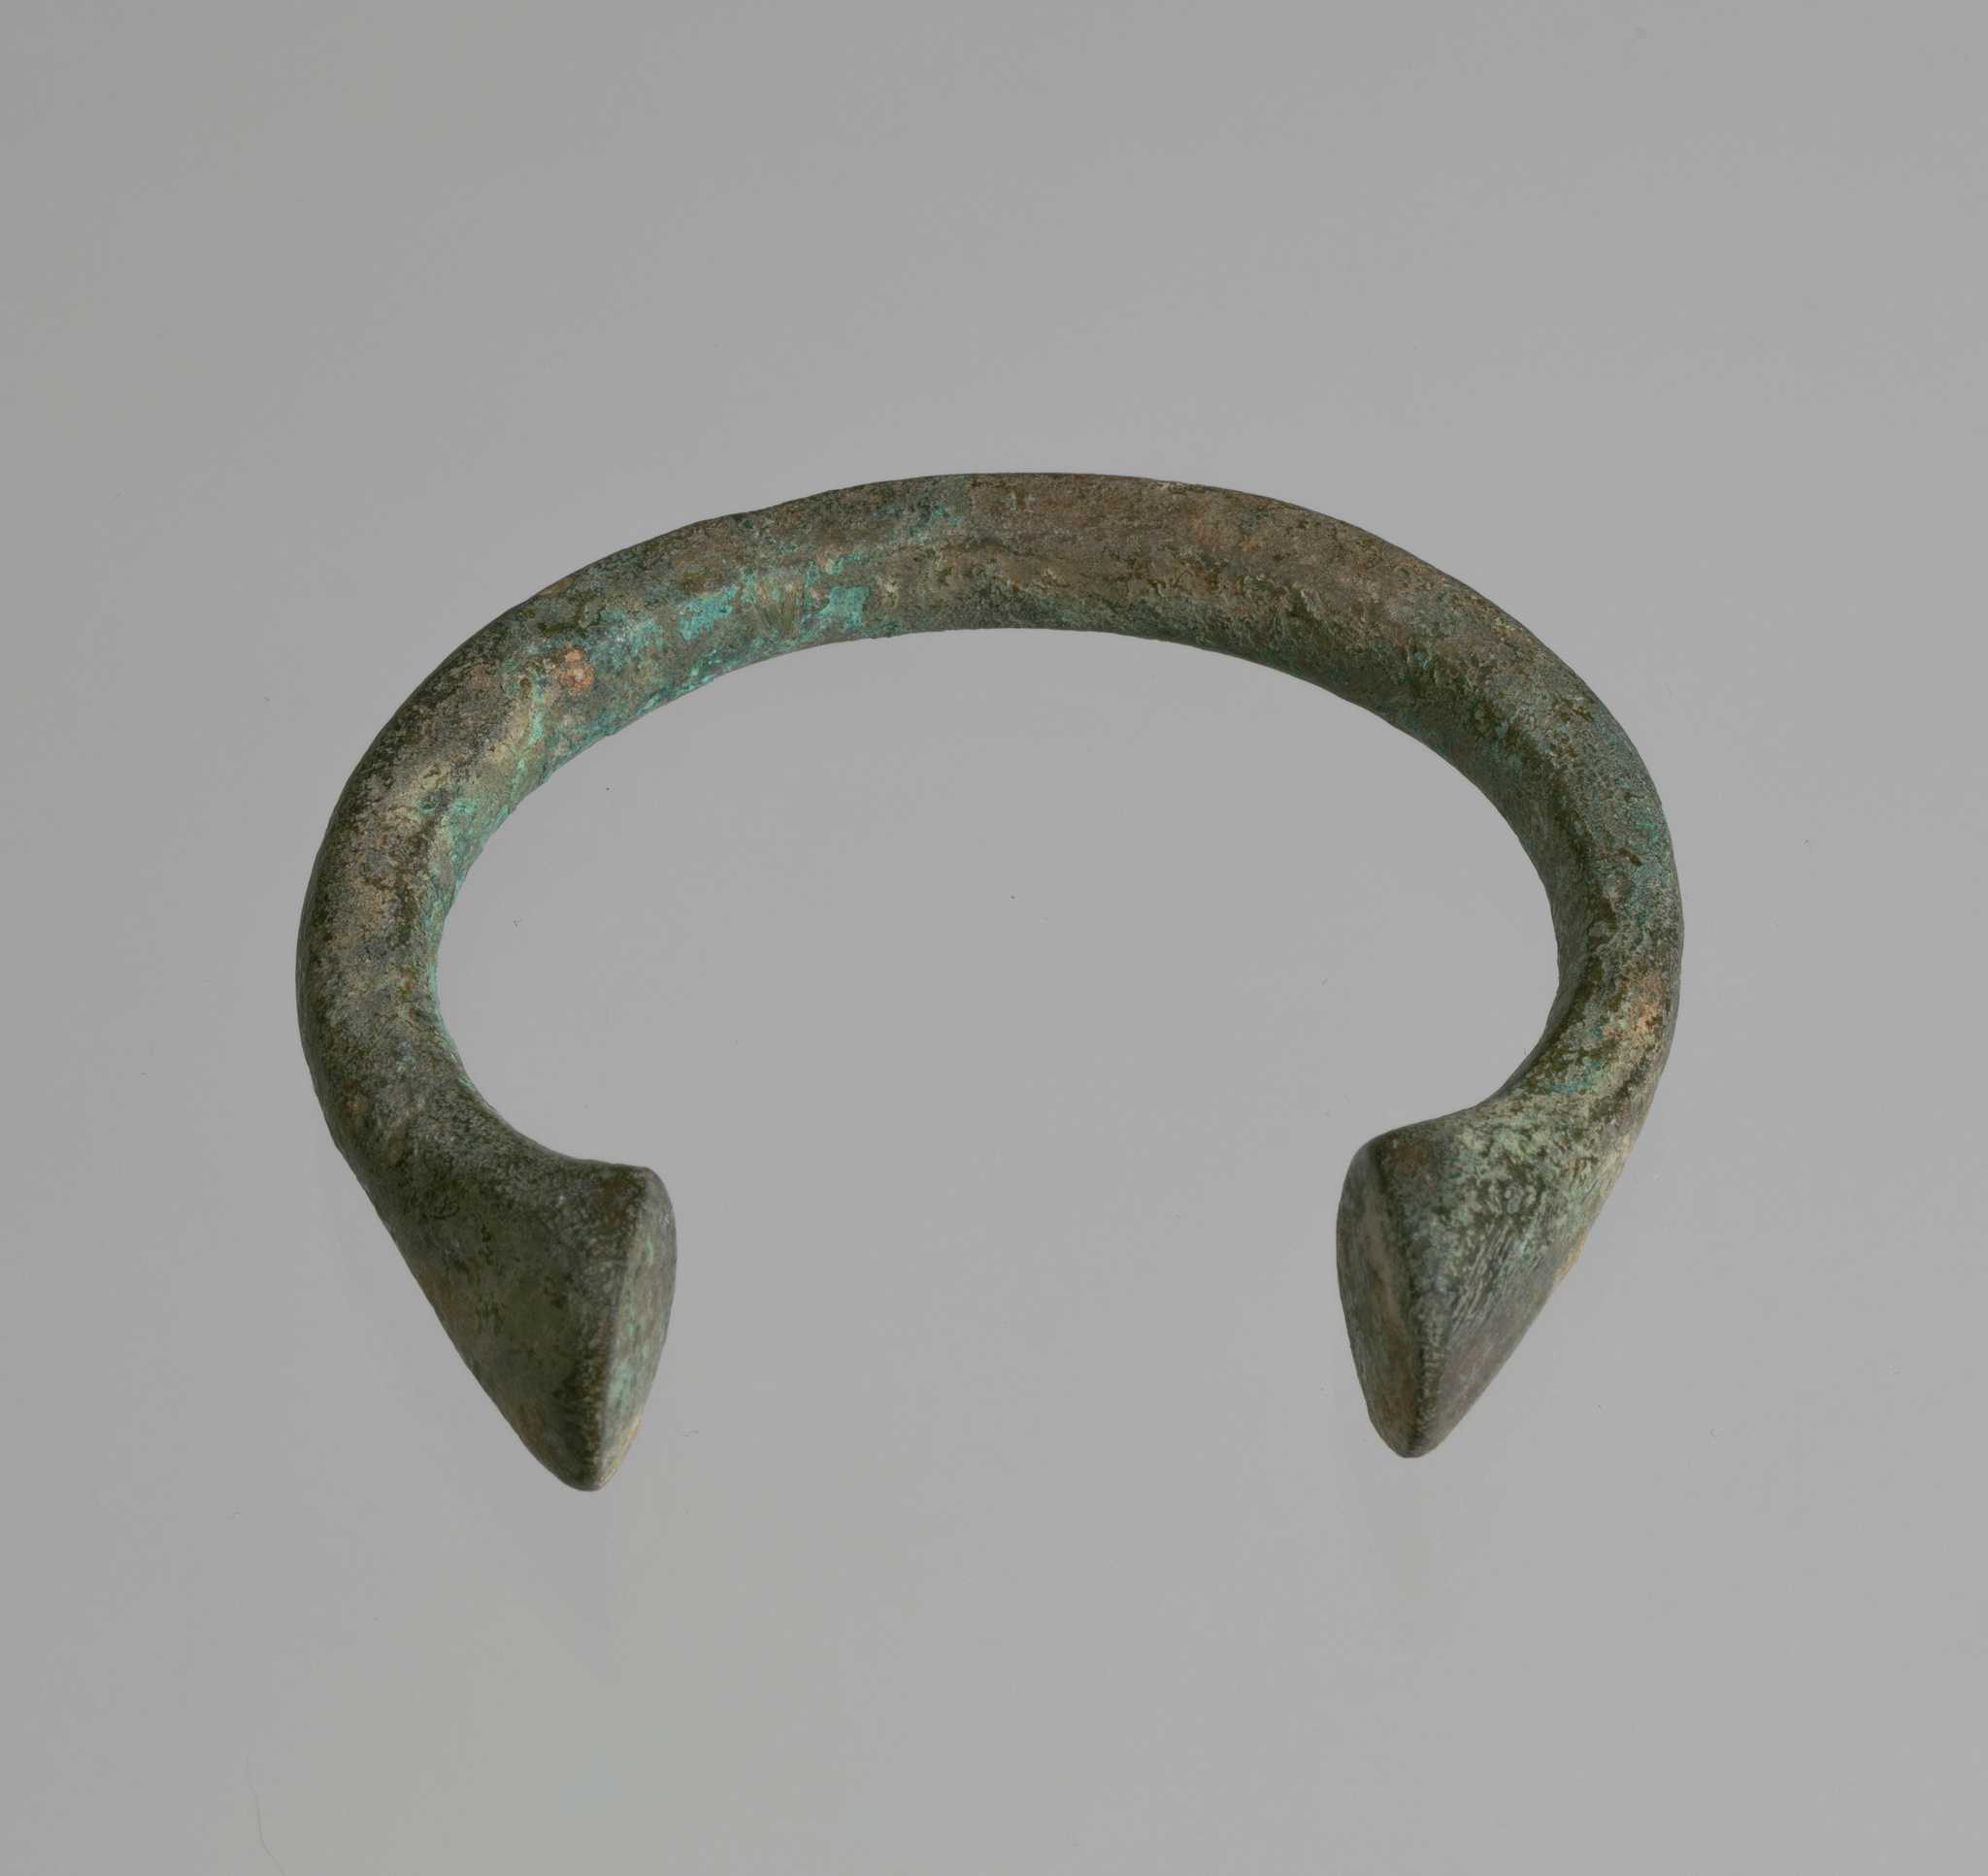 Manilla, a form of currency that circulated in West Africa, in a semi-circular horseshoe shape, with slight flairs at ends.